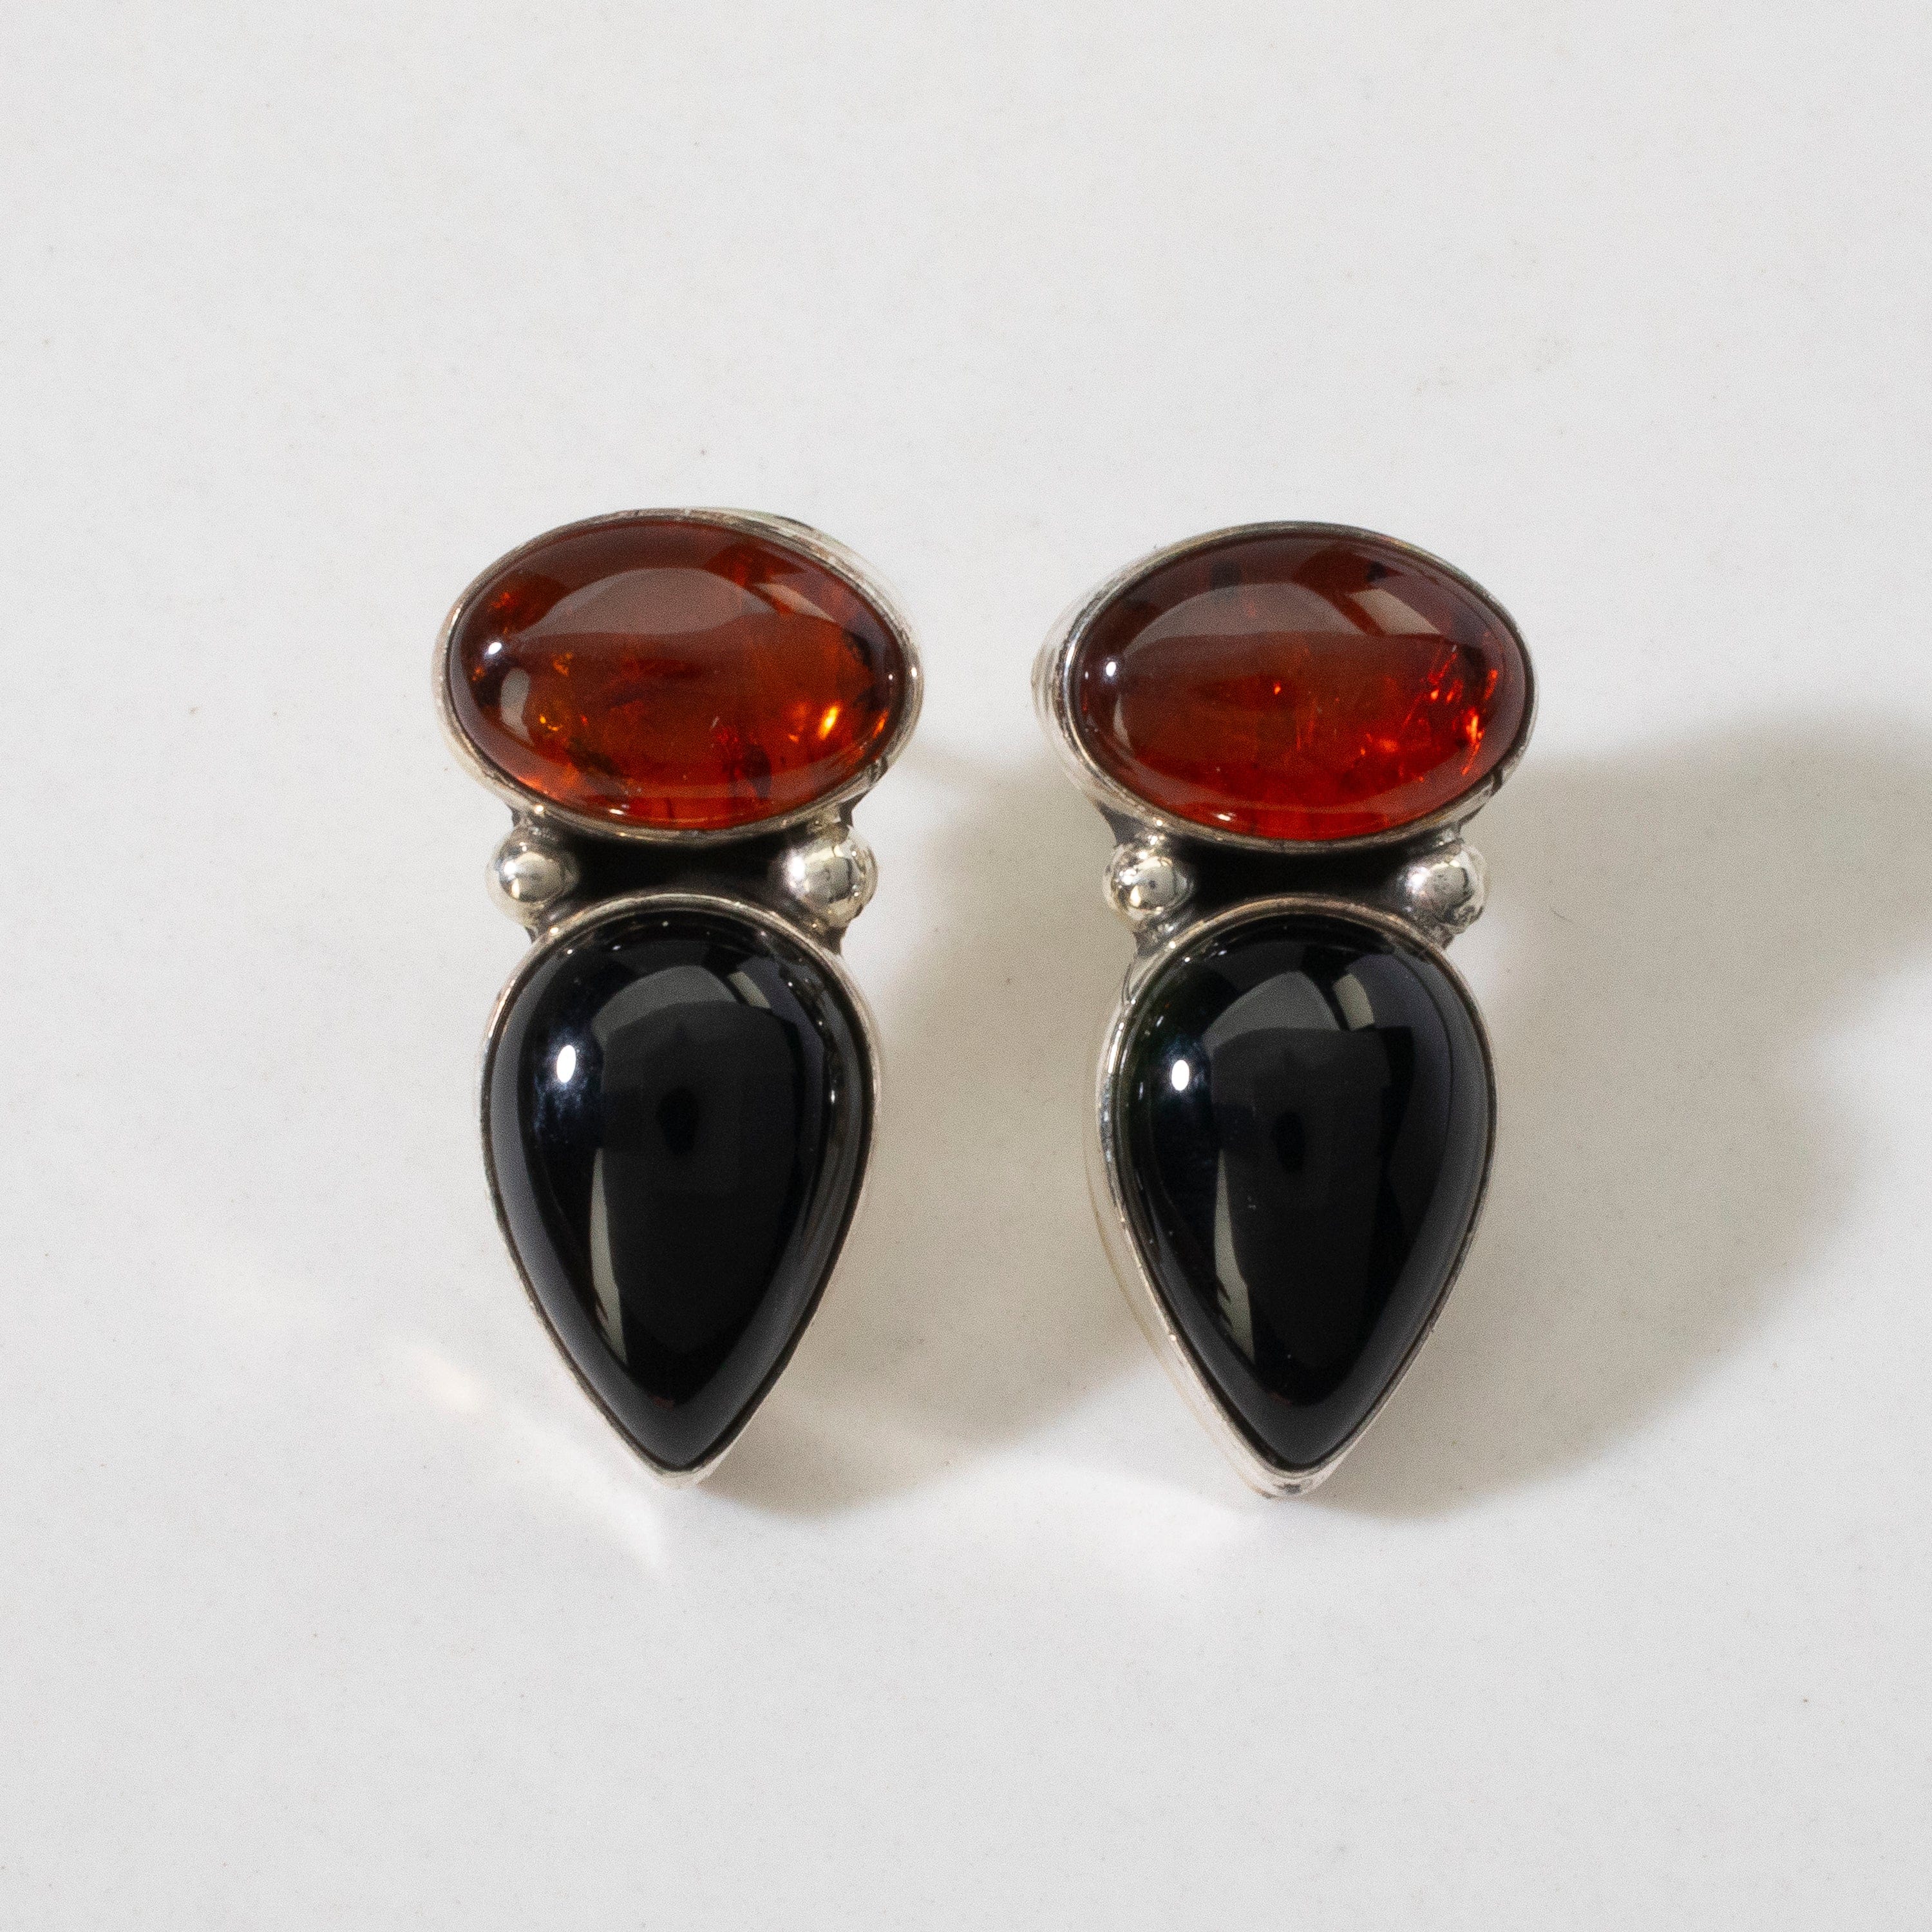 Kalifano Native American Jewelry Baltic Amber & Black Onyx Navajo USA Native American Made 925 Sterling Silver Earrings with Stud Backing NAE300.027